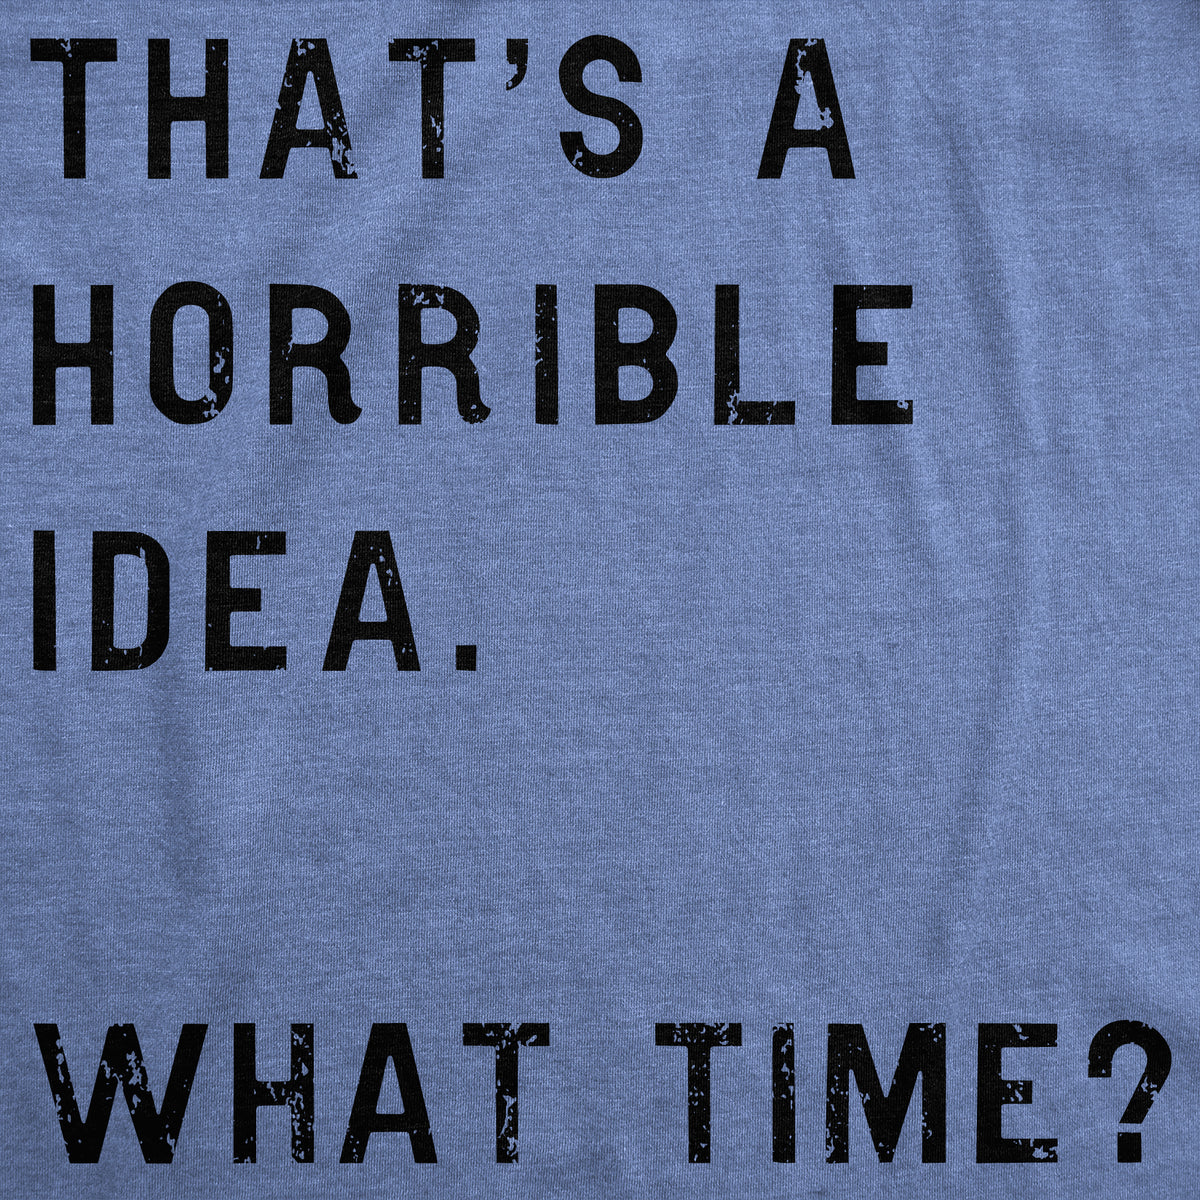 That Sounds Like A Horrible Idea. What Time? Men&#39;s T Shirt